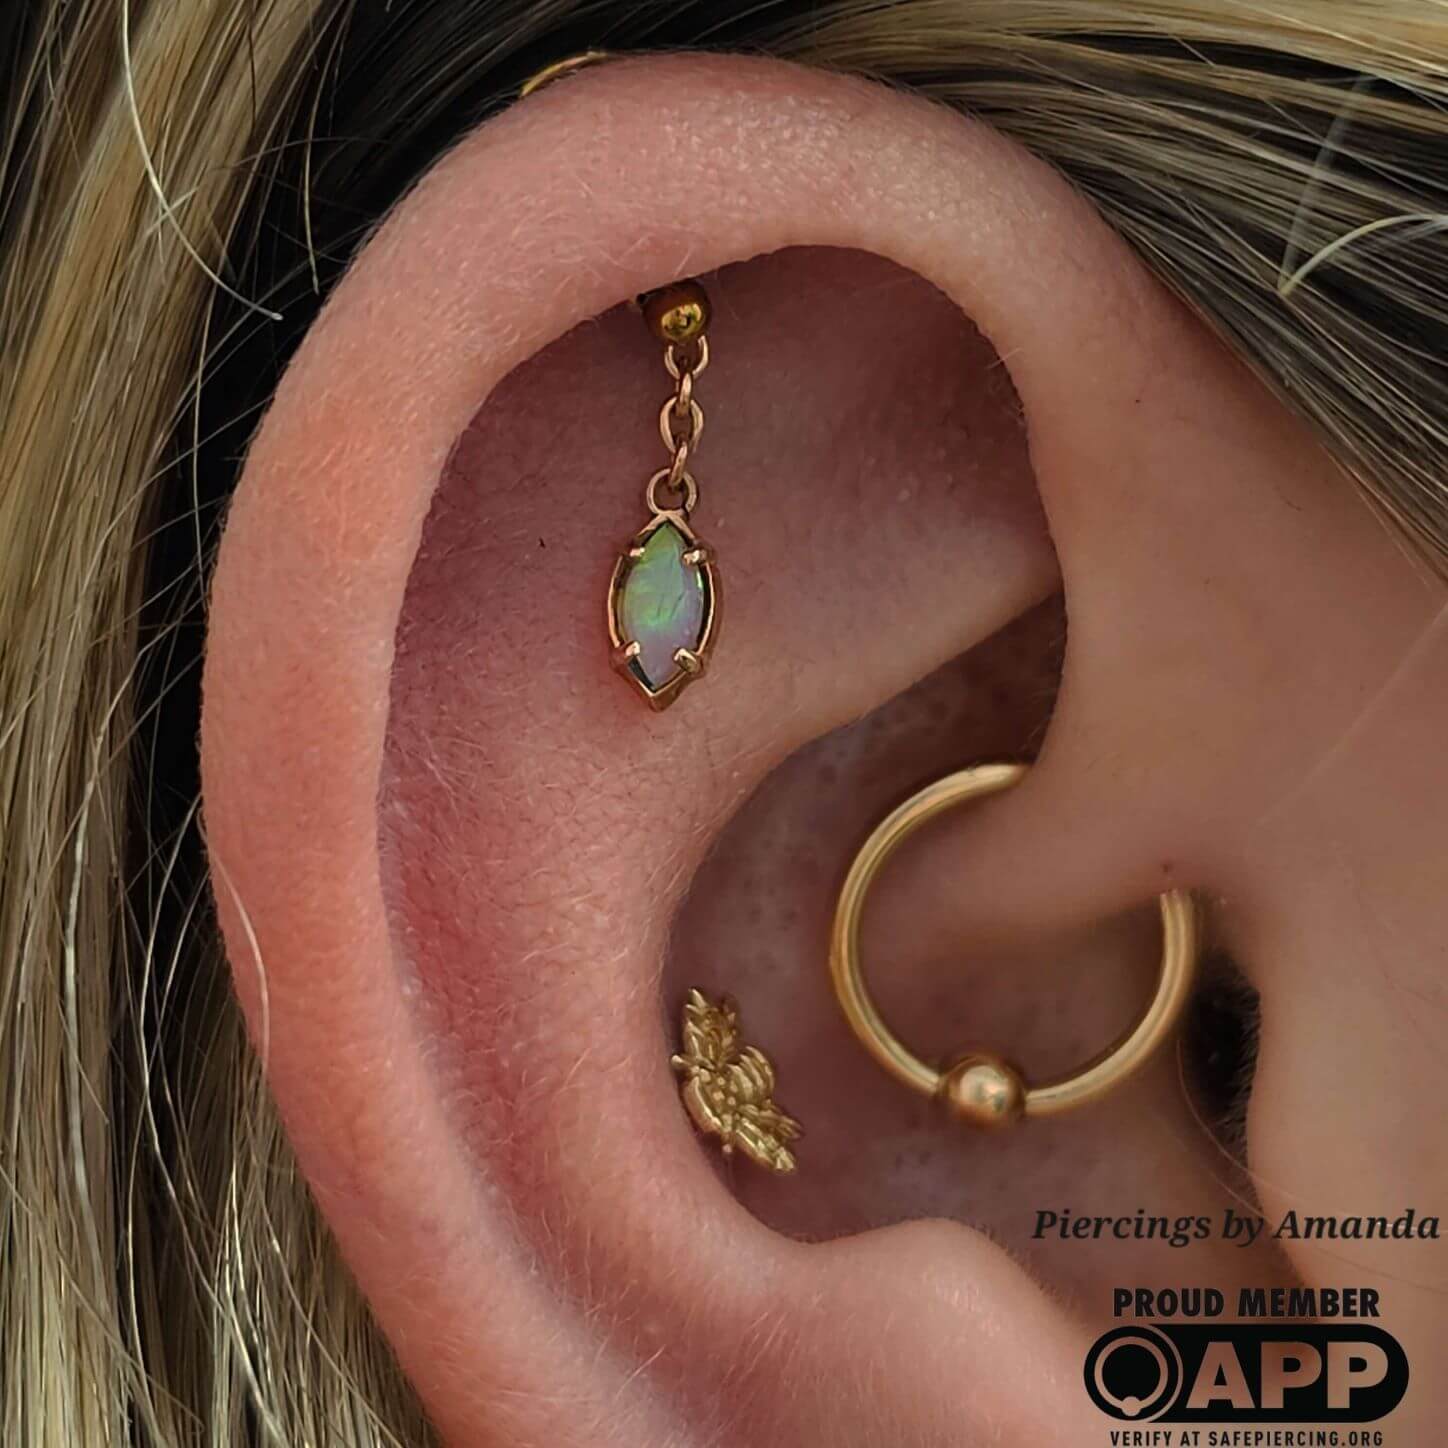 Ear curation with rose gold